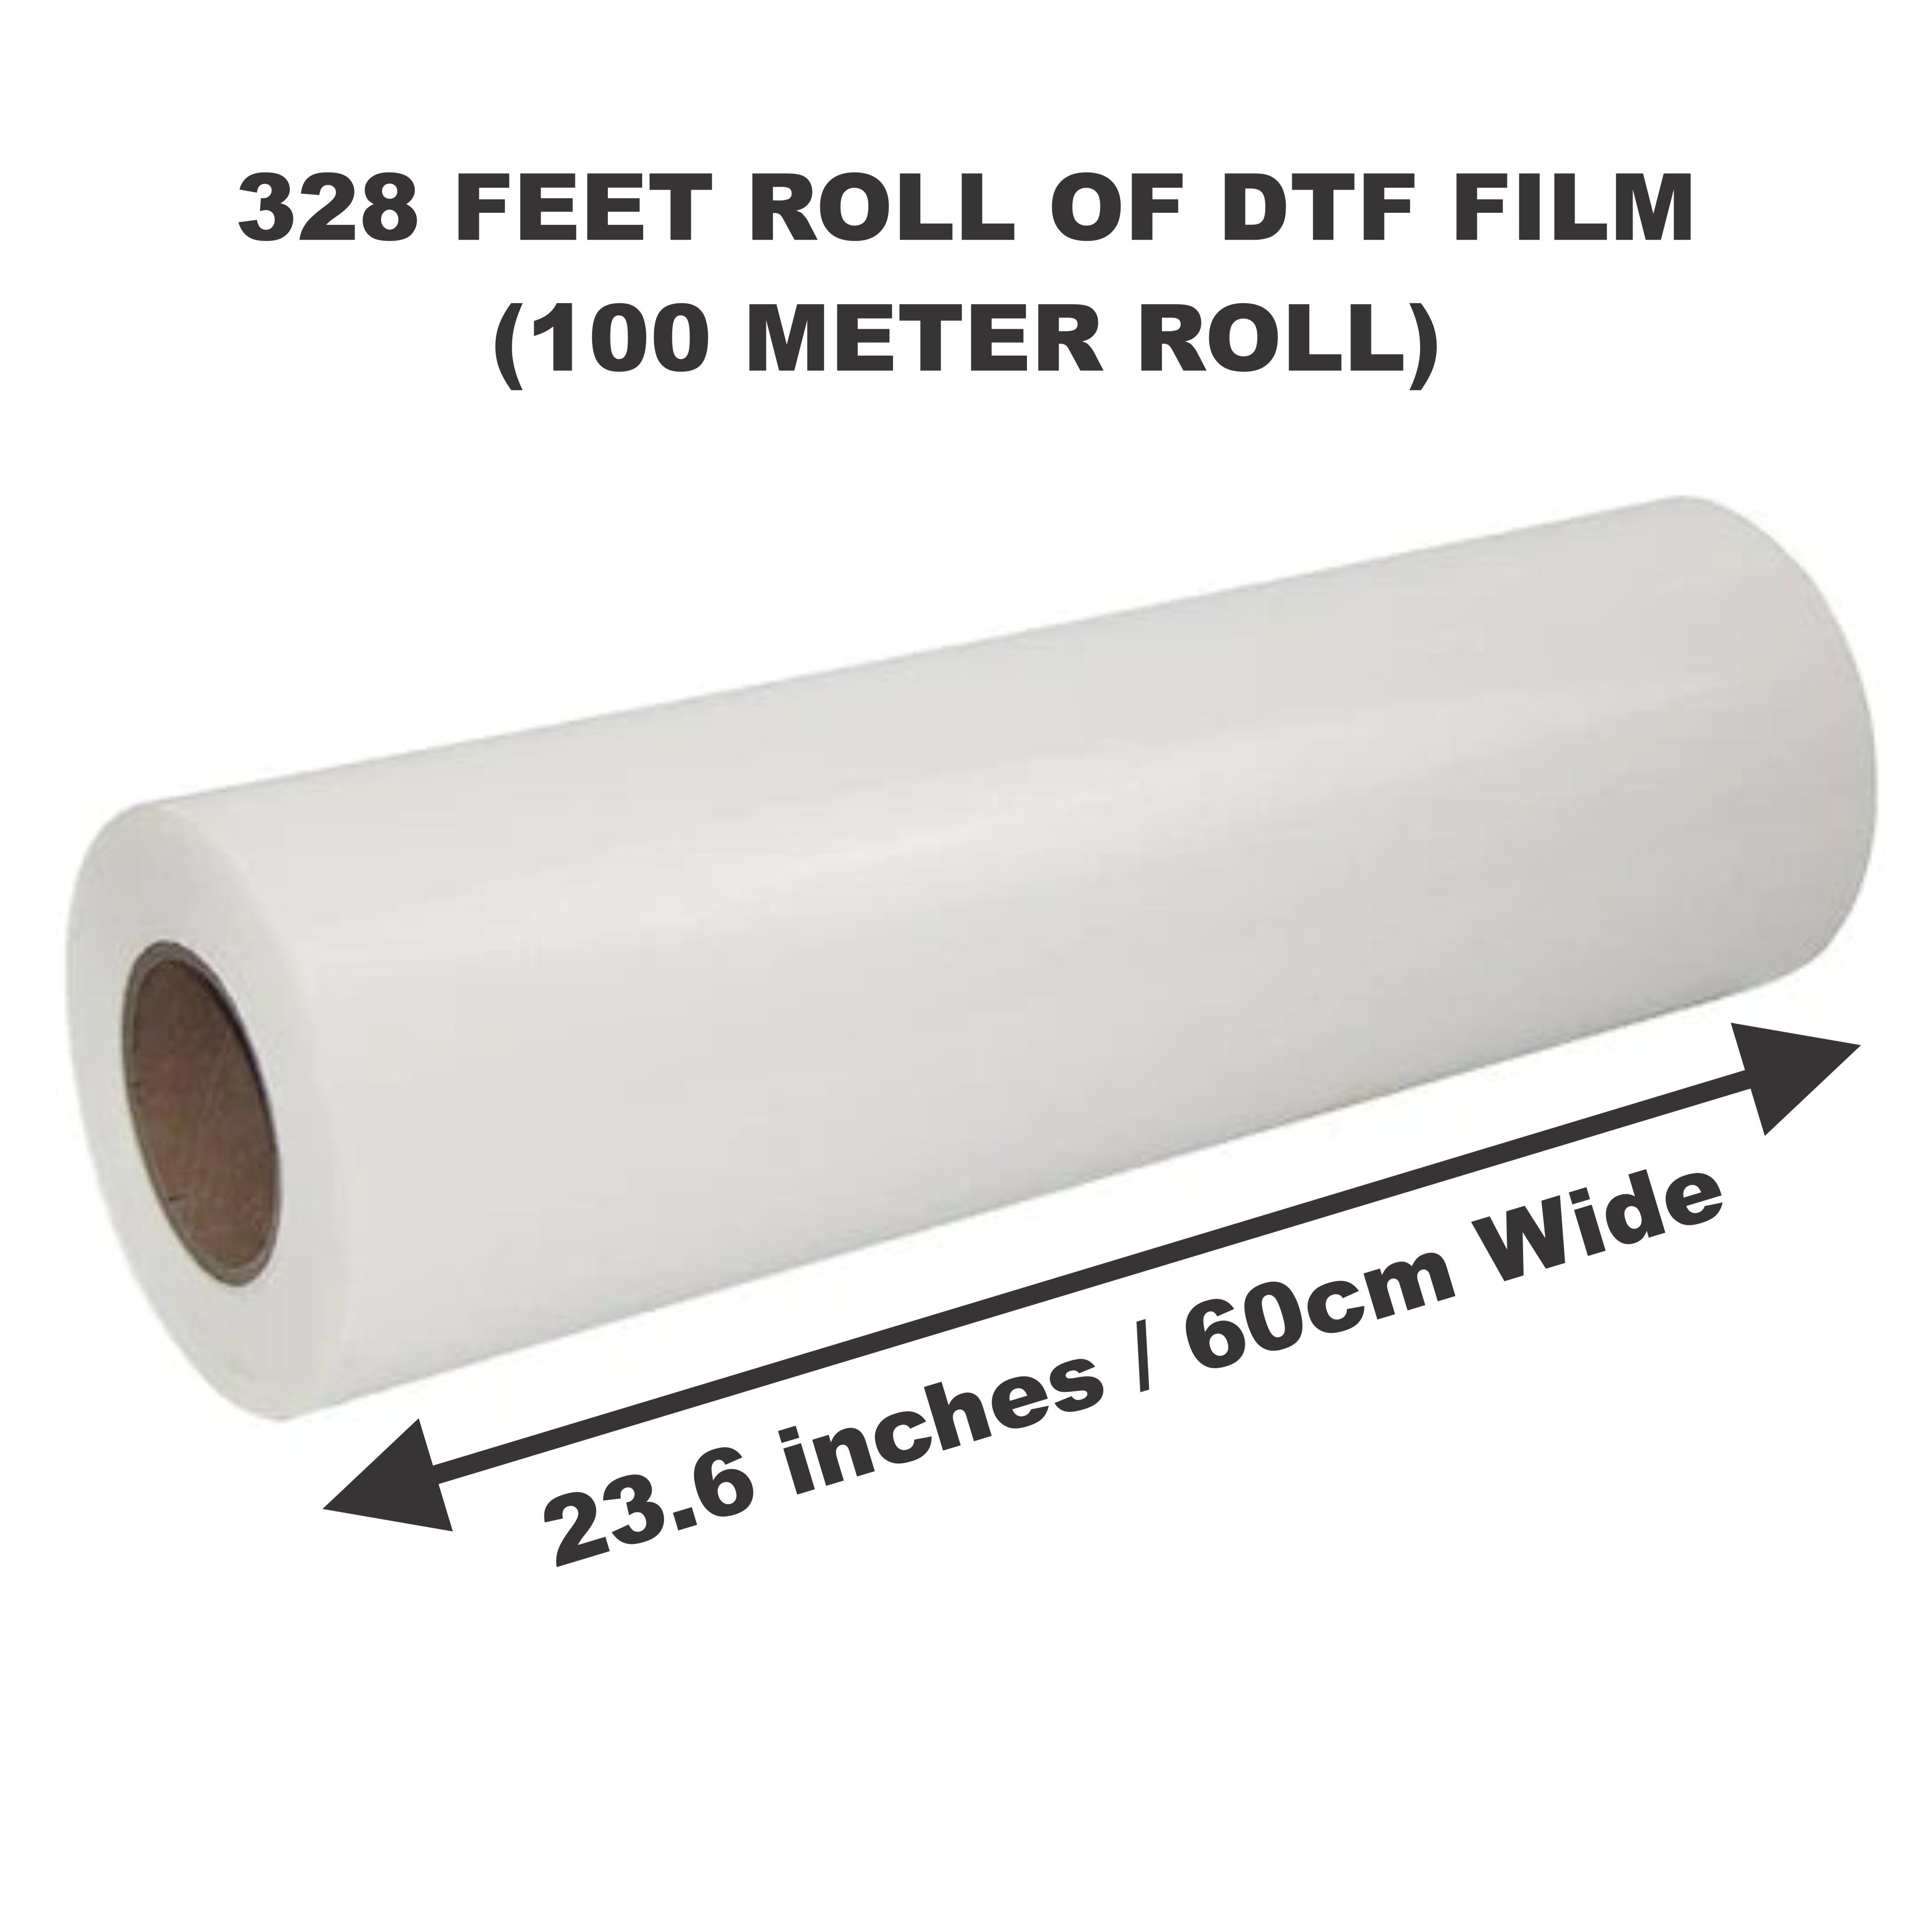 23.6” x 328 Feet Roll Of DTF Film - Double Sided Instant Hot Peel